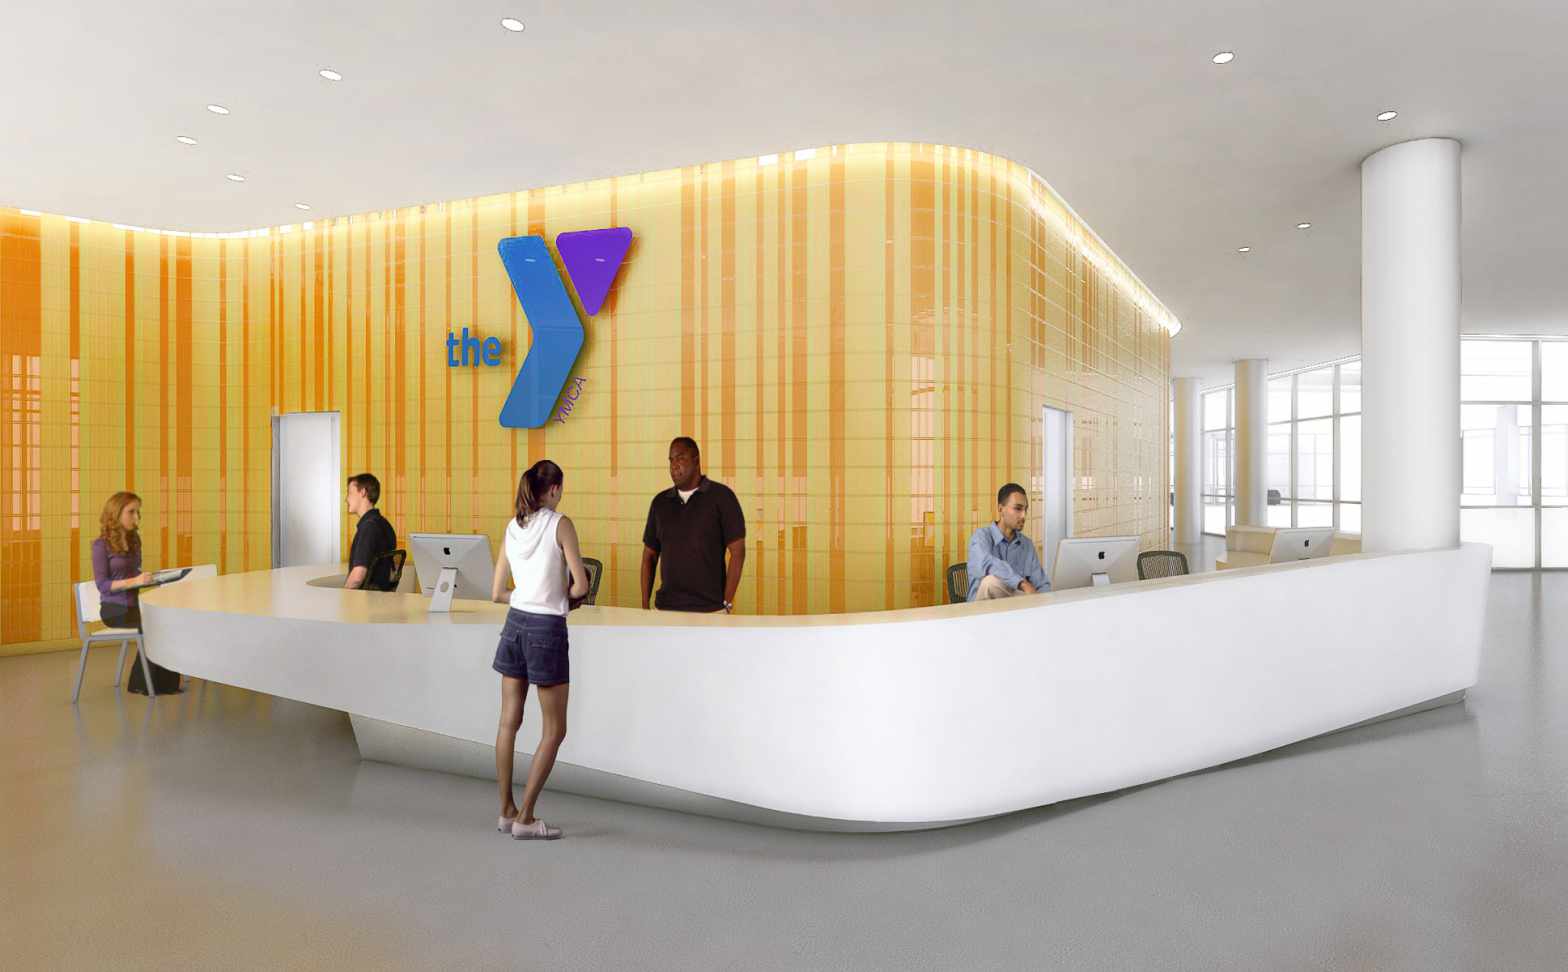 The YMCA at La Central, rendering by FXFOWLE